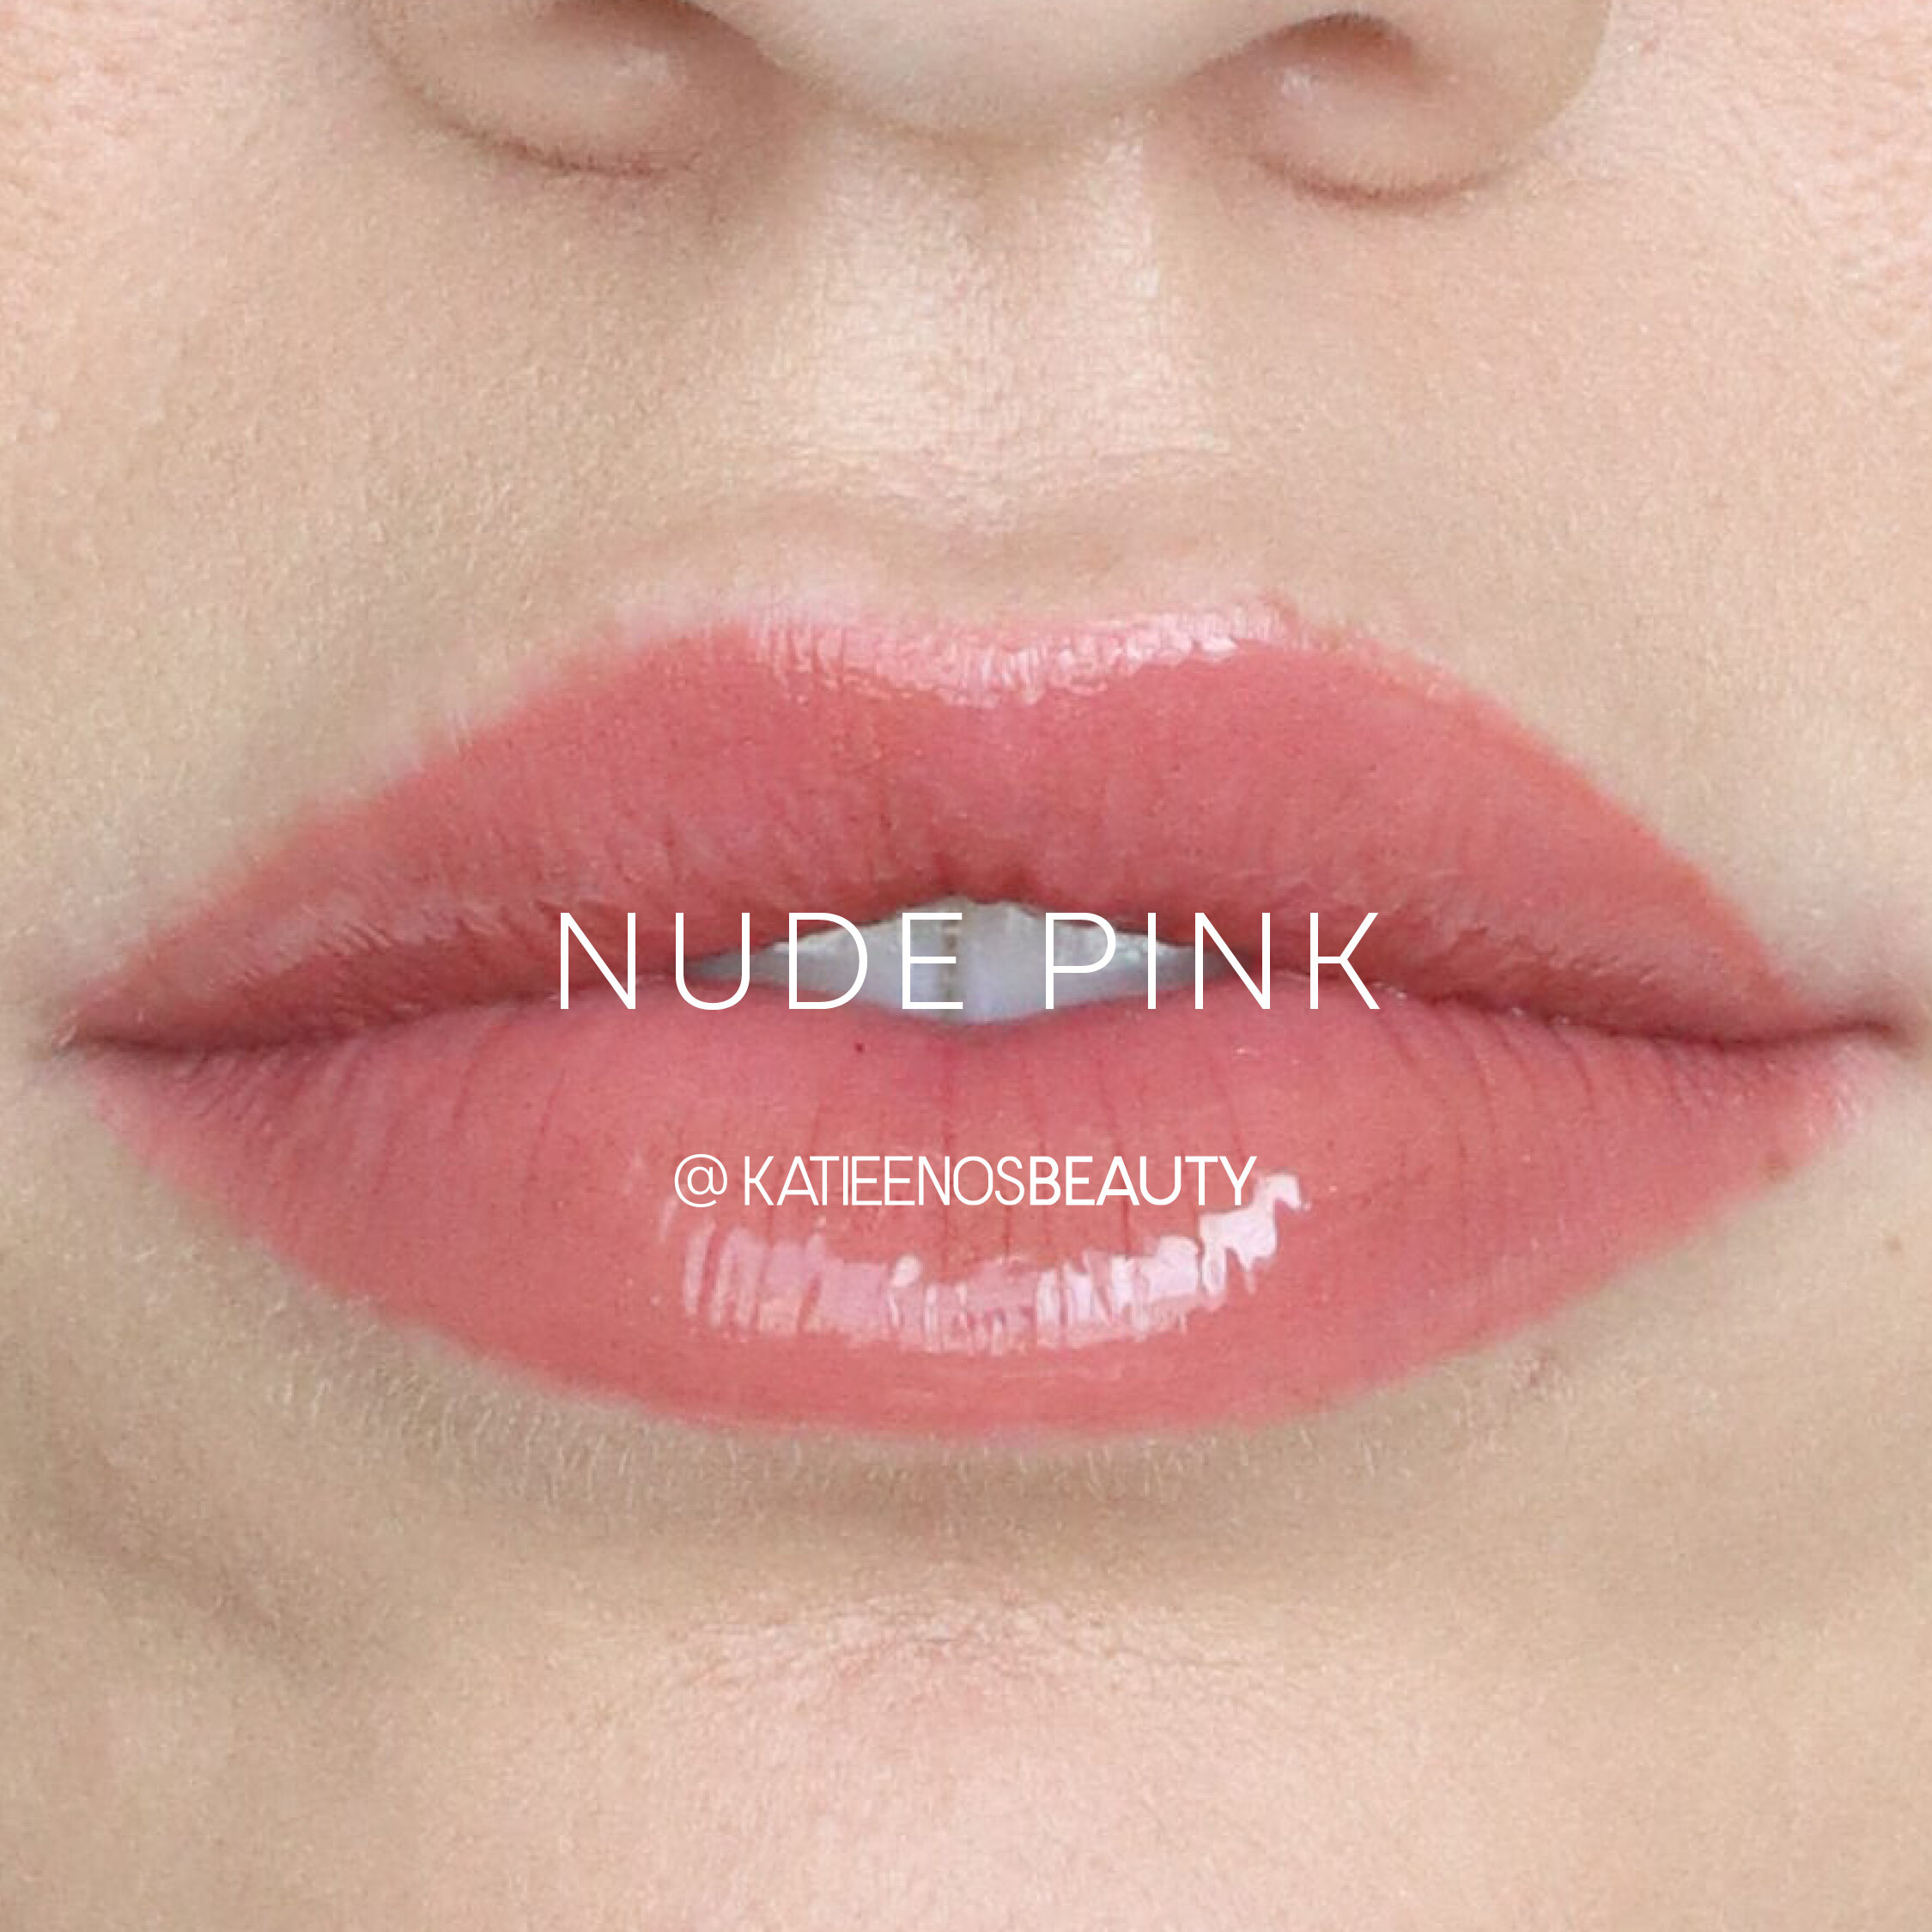 NUDE PINK